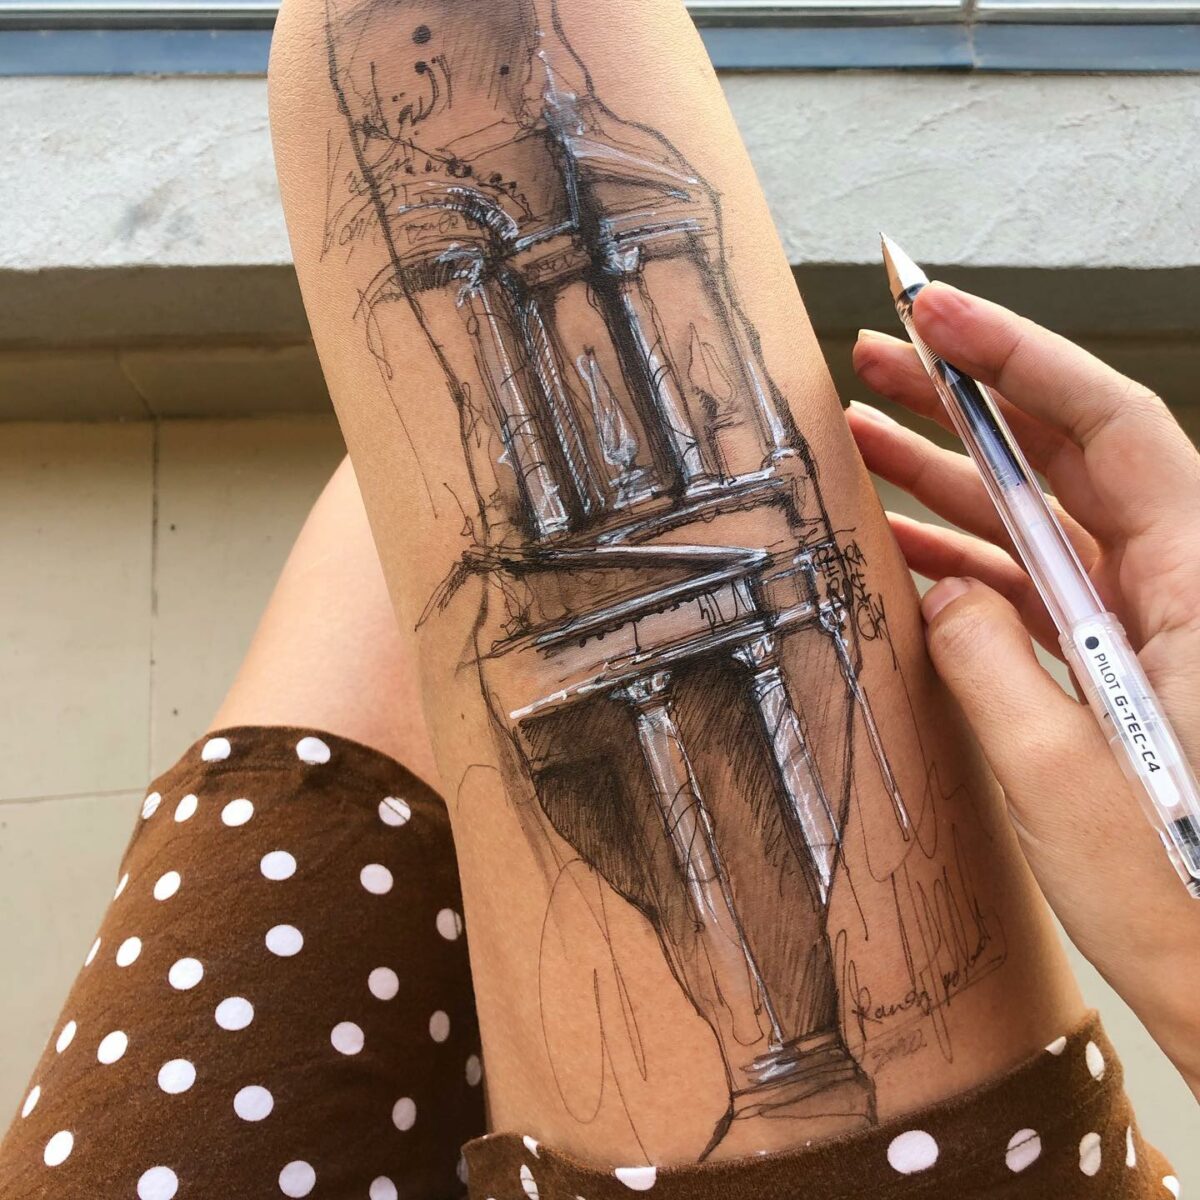 Stunning Ink Drawings Made On The Thighs By Randa Haddadin 3